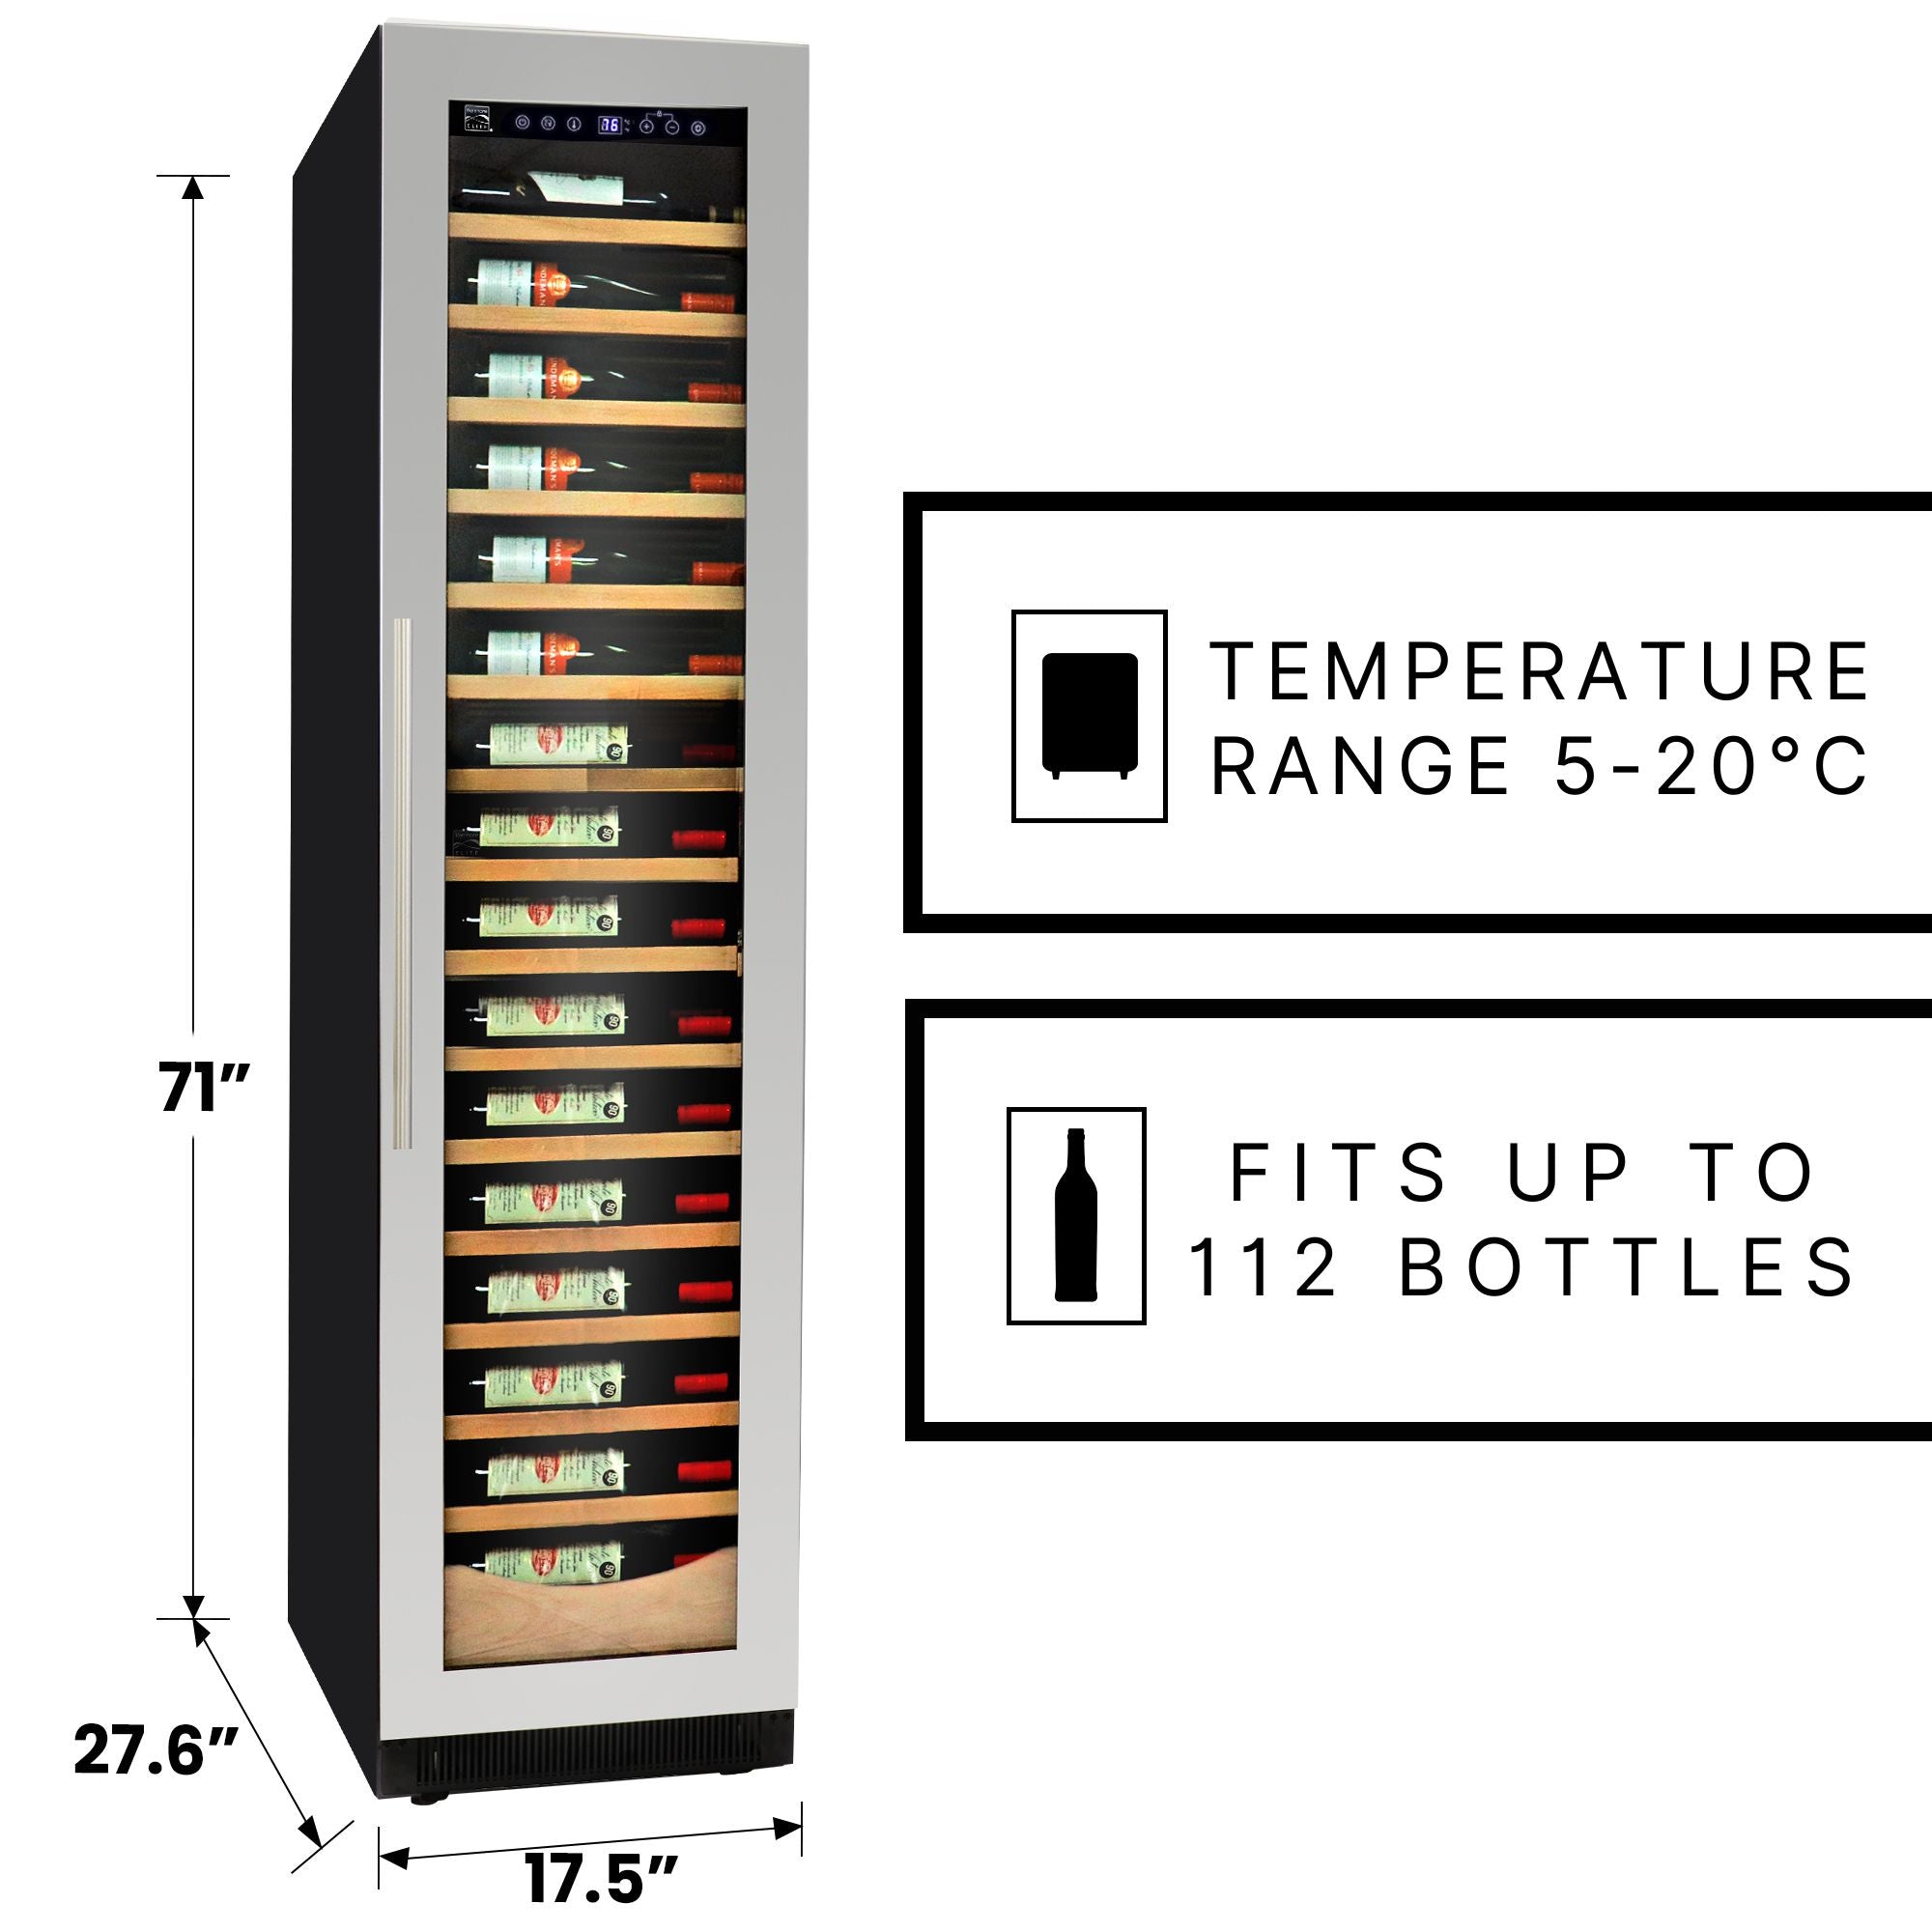 Kenmore Elite 18 inch premium wine fridge on a white background with dimensions labeled. Text and icons to the right describe, "Temperature range 5-20C," and "Fits up to 112 bottles"